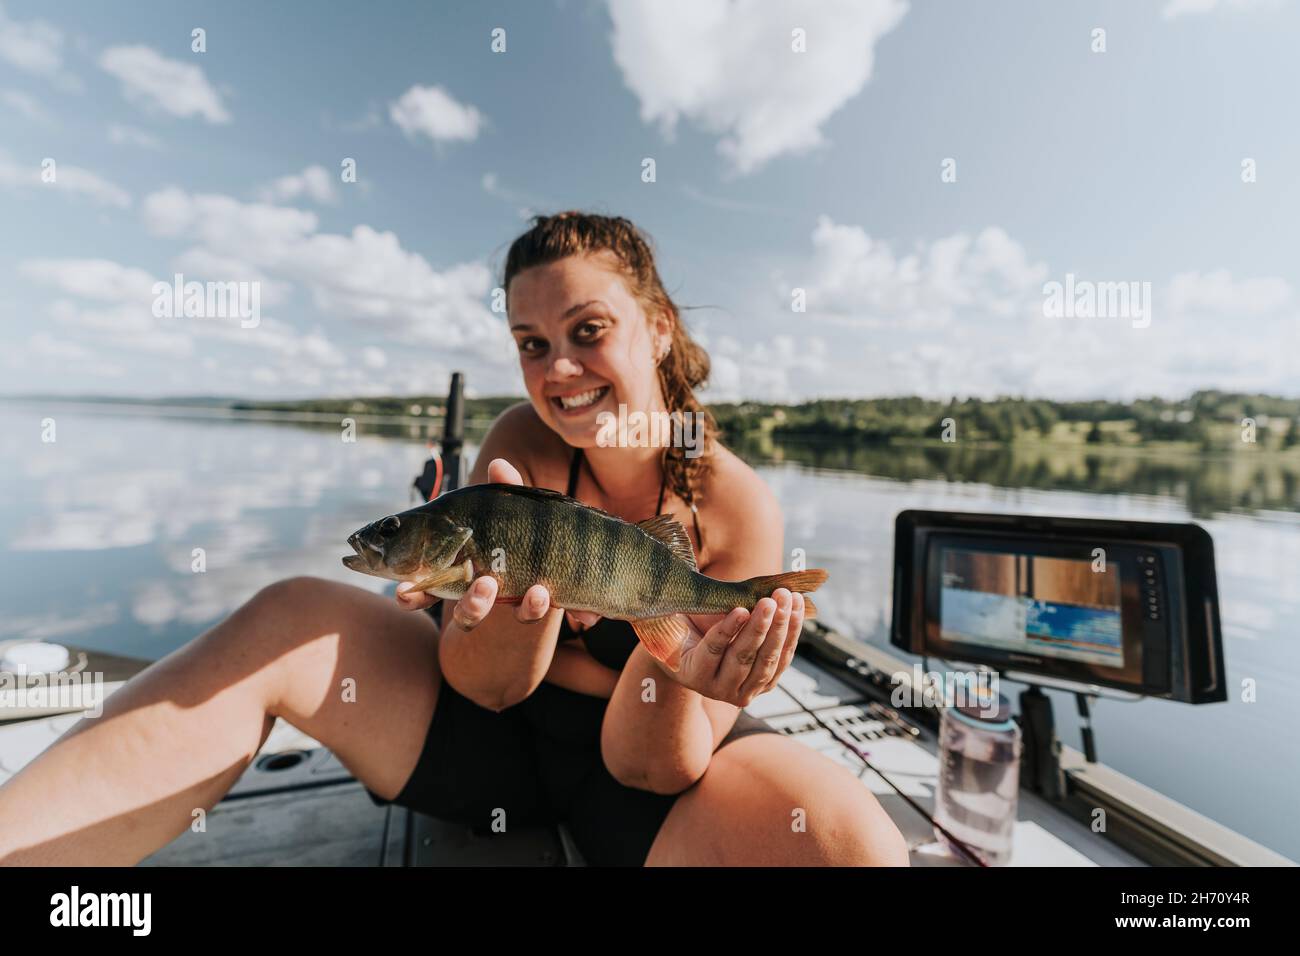 Smiling woman on boat holding fish Stock Photo